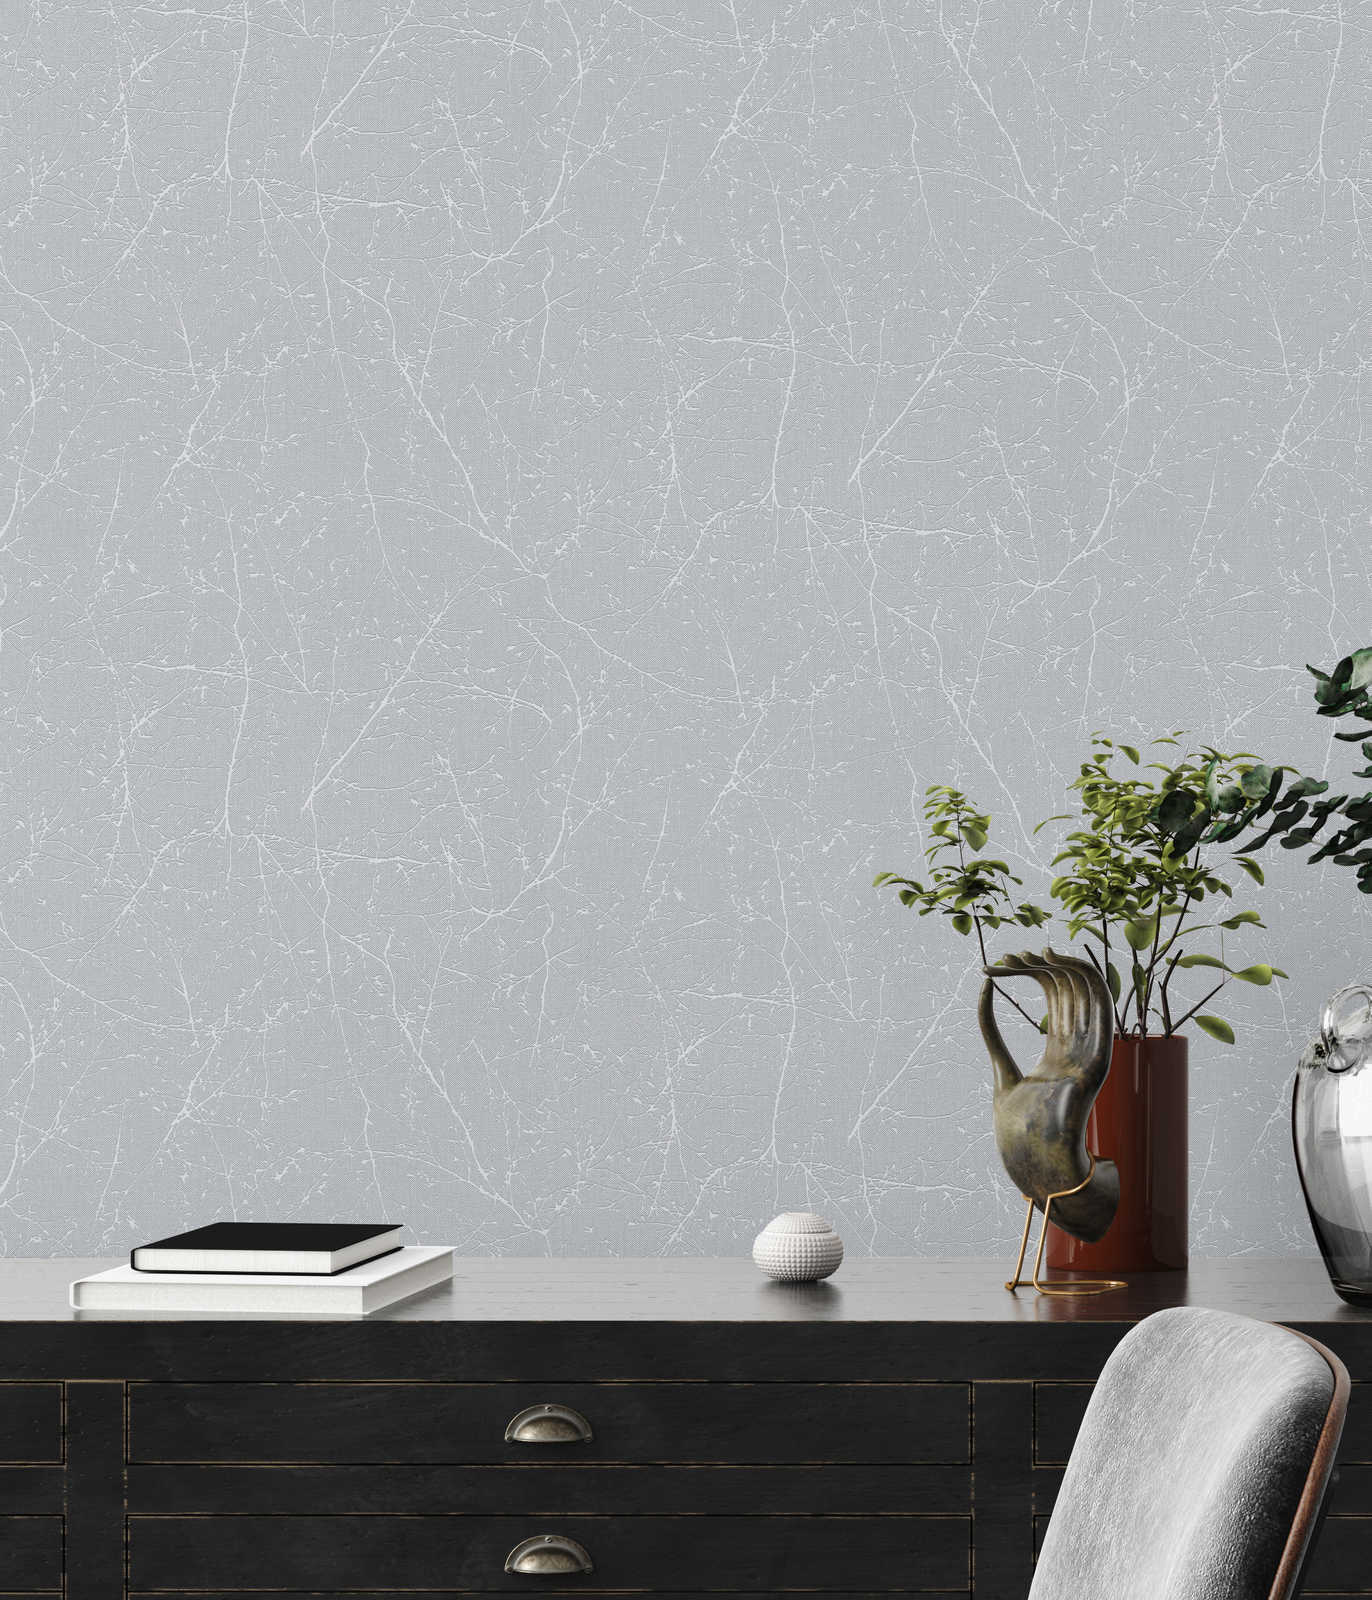             Non-woven wallpaper with branch pattern and light structure - light grey, white
        